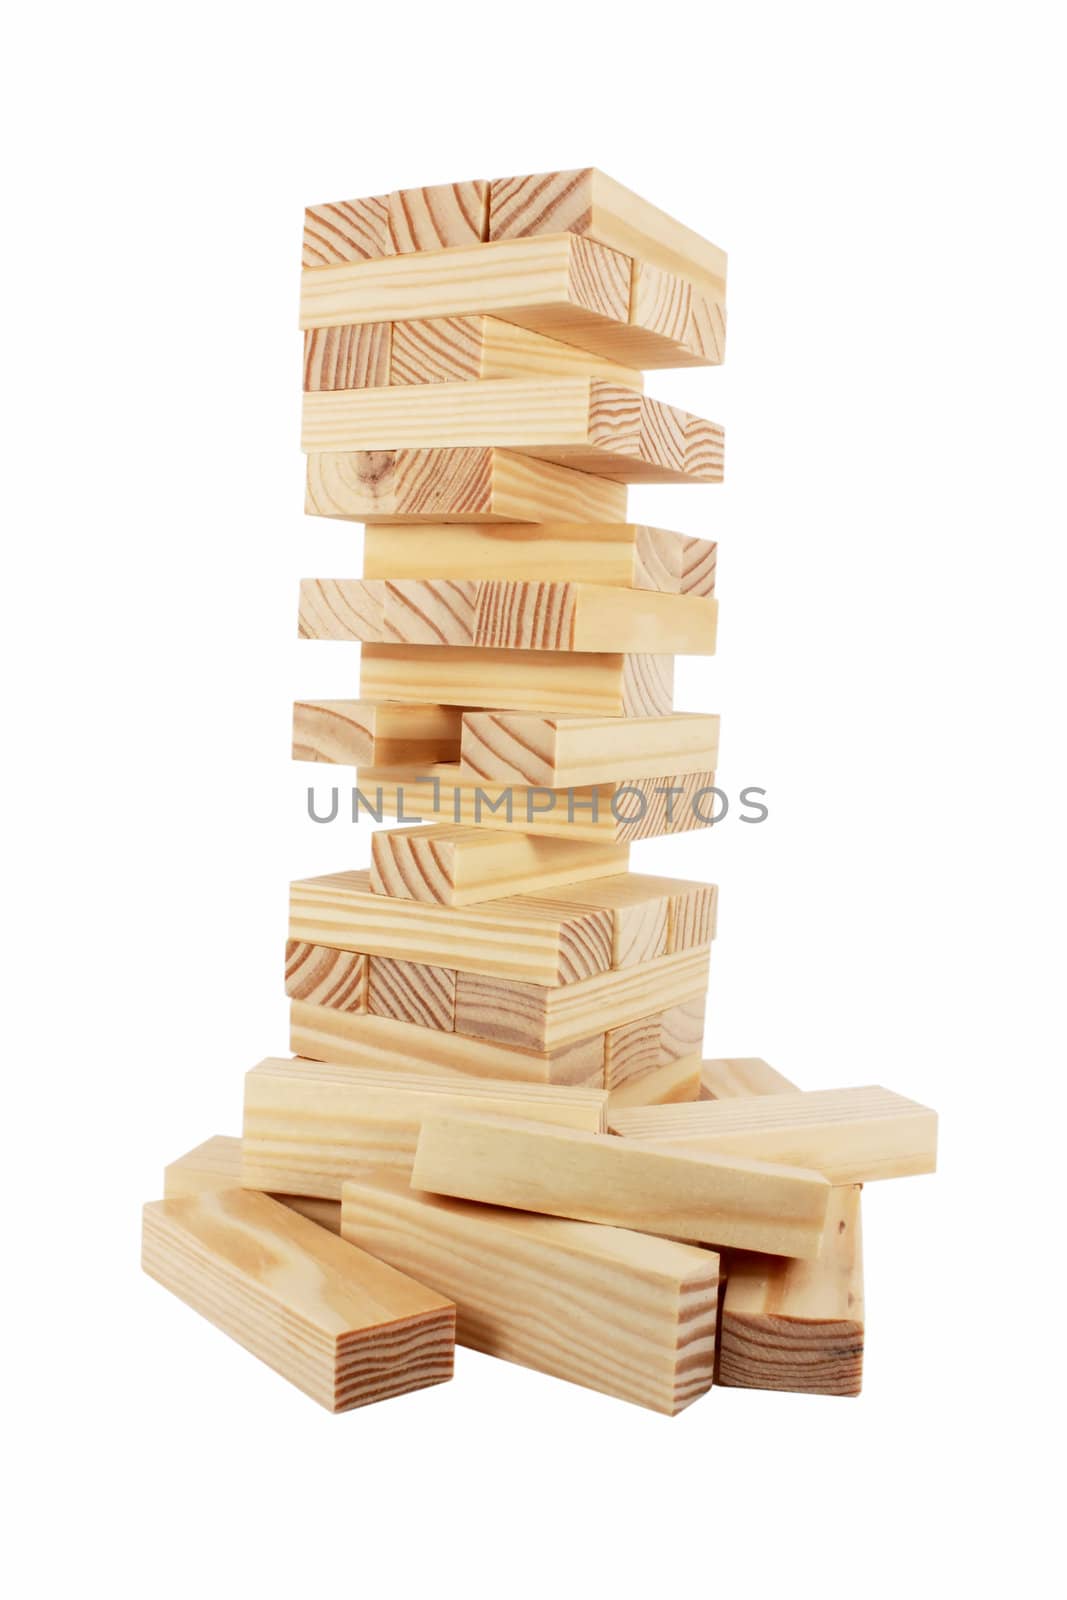 Wood bricks a child game, isolated on white